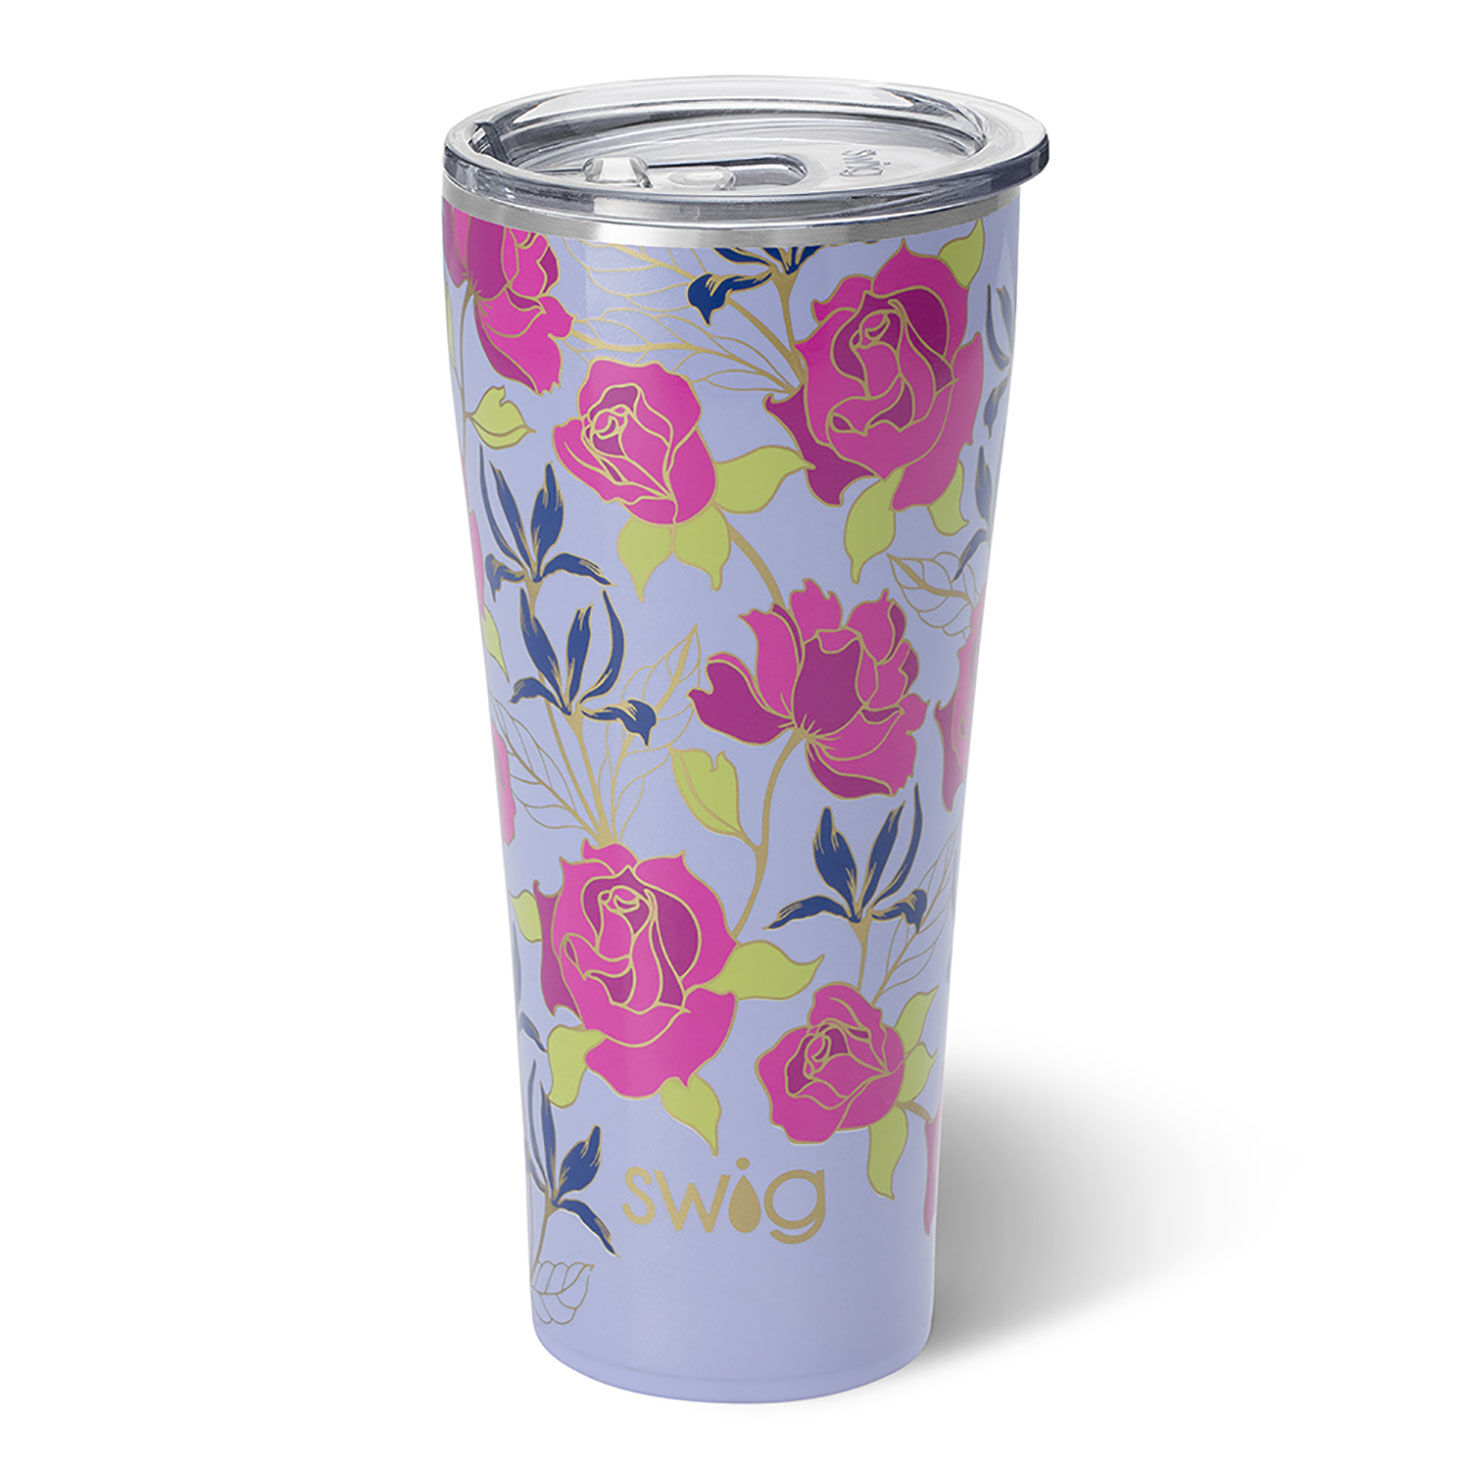 Custom Personalized Stainless Steel Tumblers for Bar and Bat Mitzvah